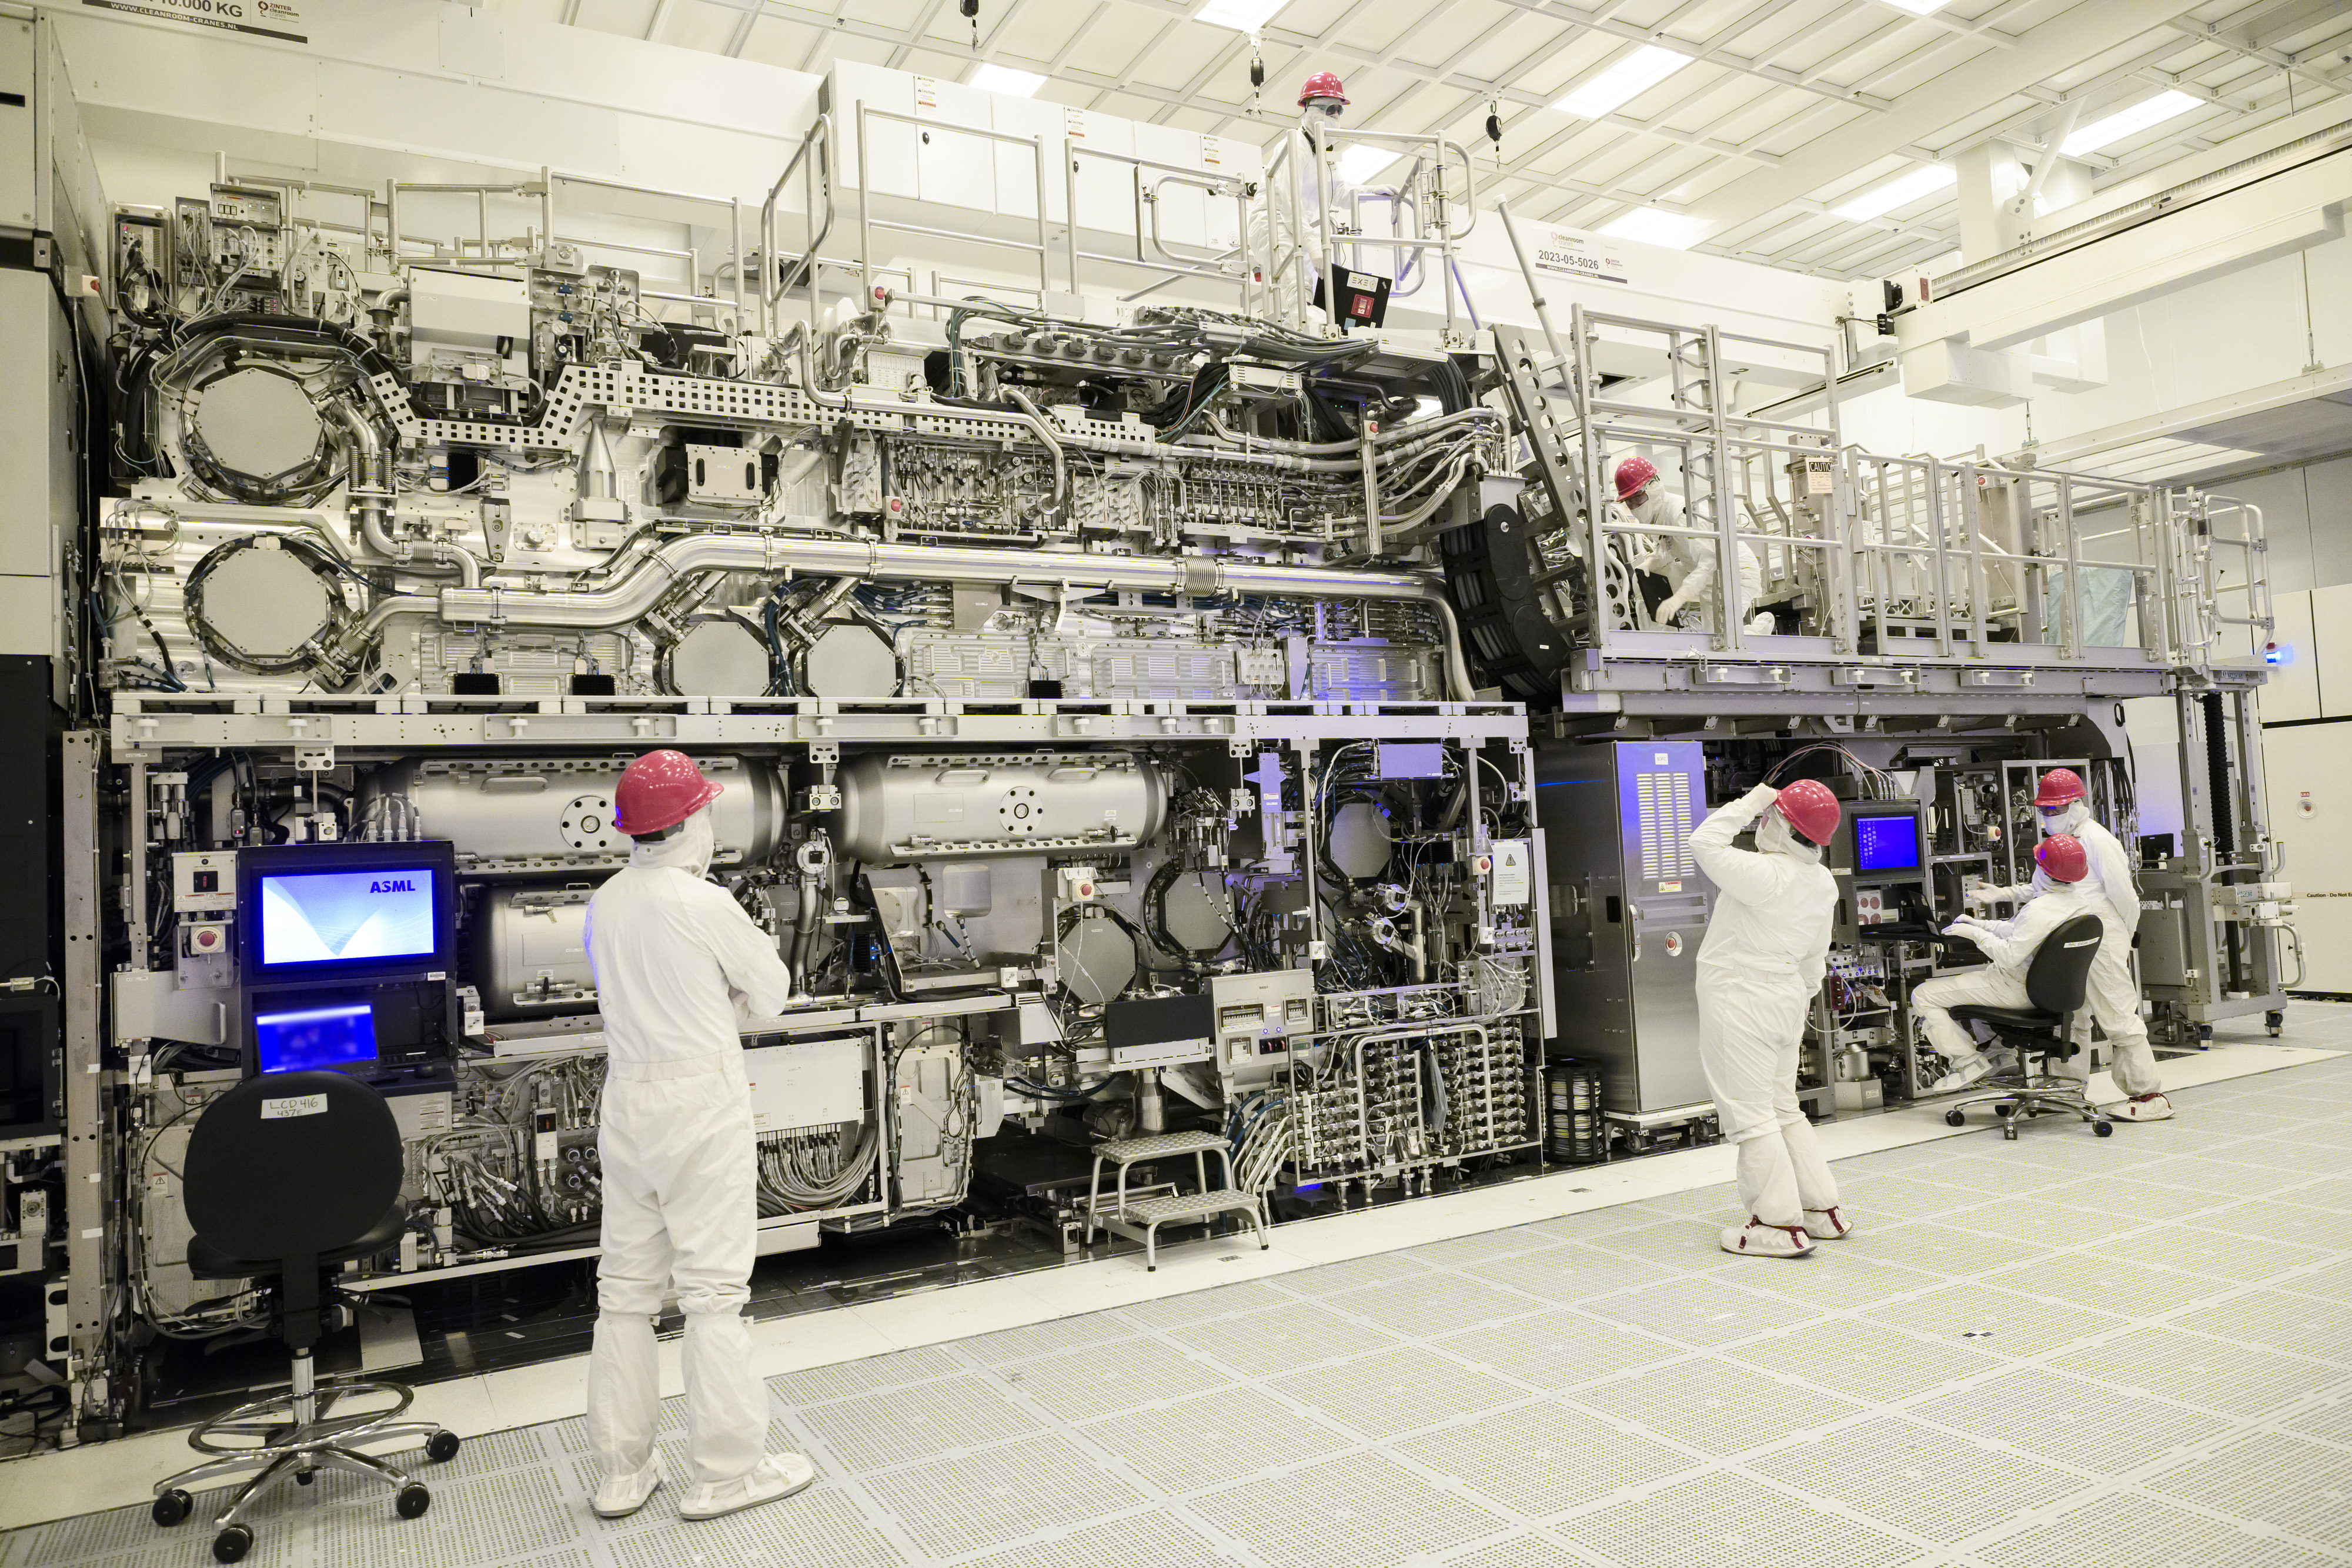 Intel completes assembly of first commercial High-NA EUV chipmaking tool as it preps for 14A process development in 2025